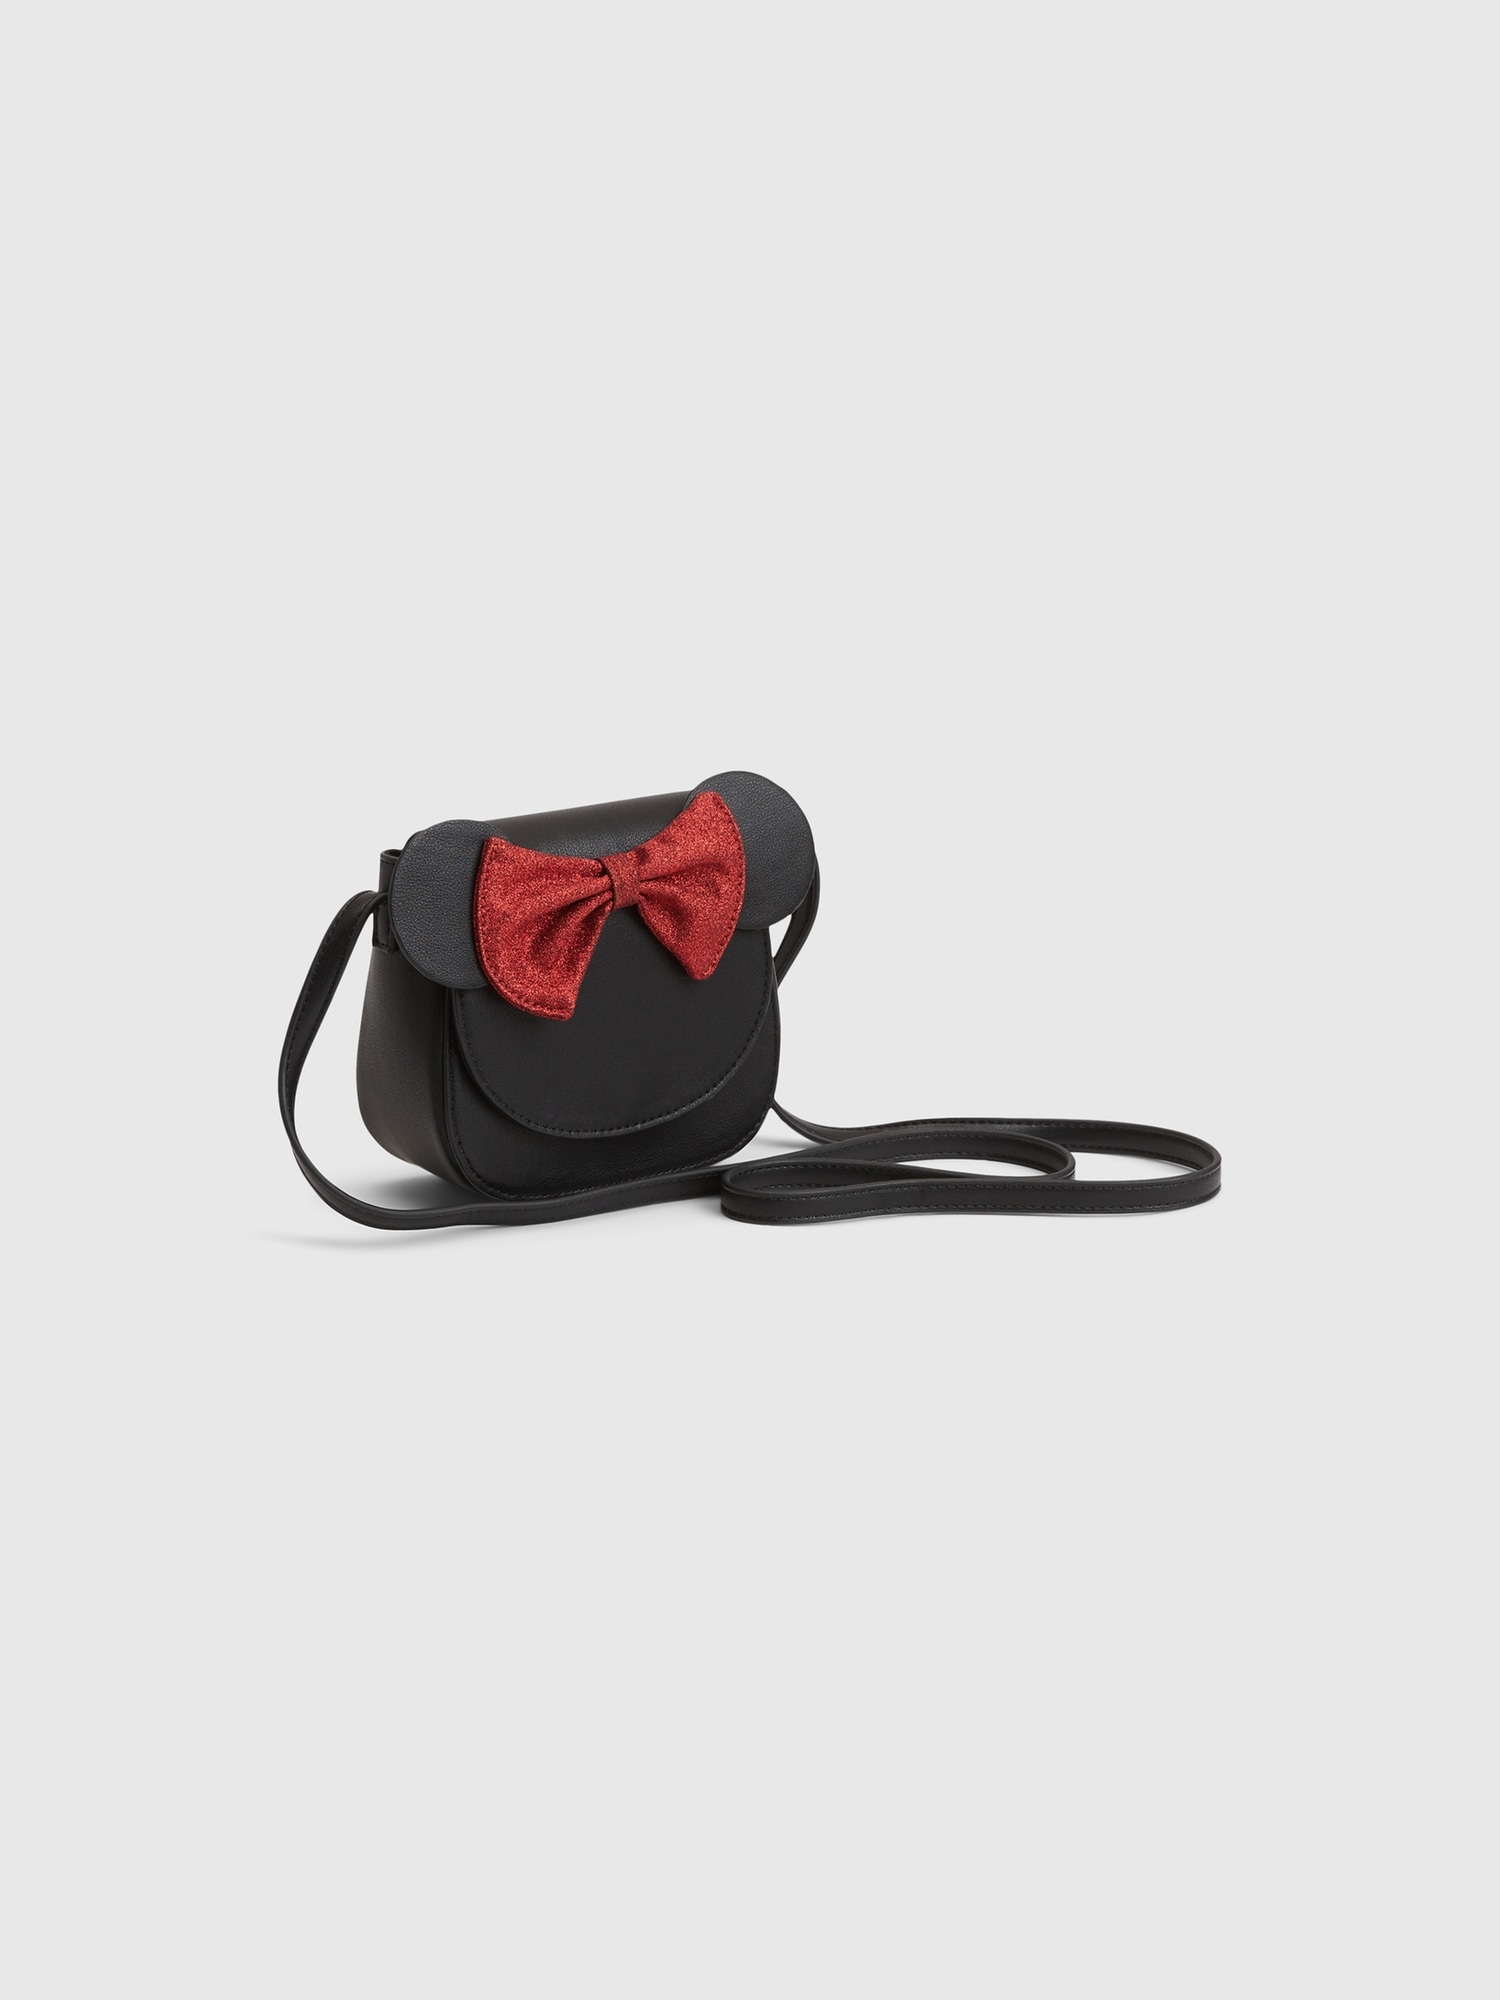 Minnie Mouse Red Crossbody Bag